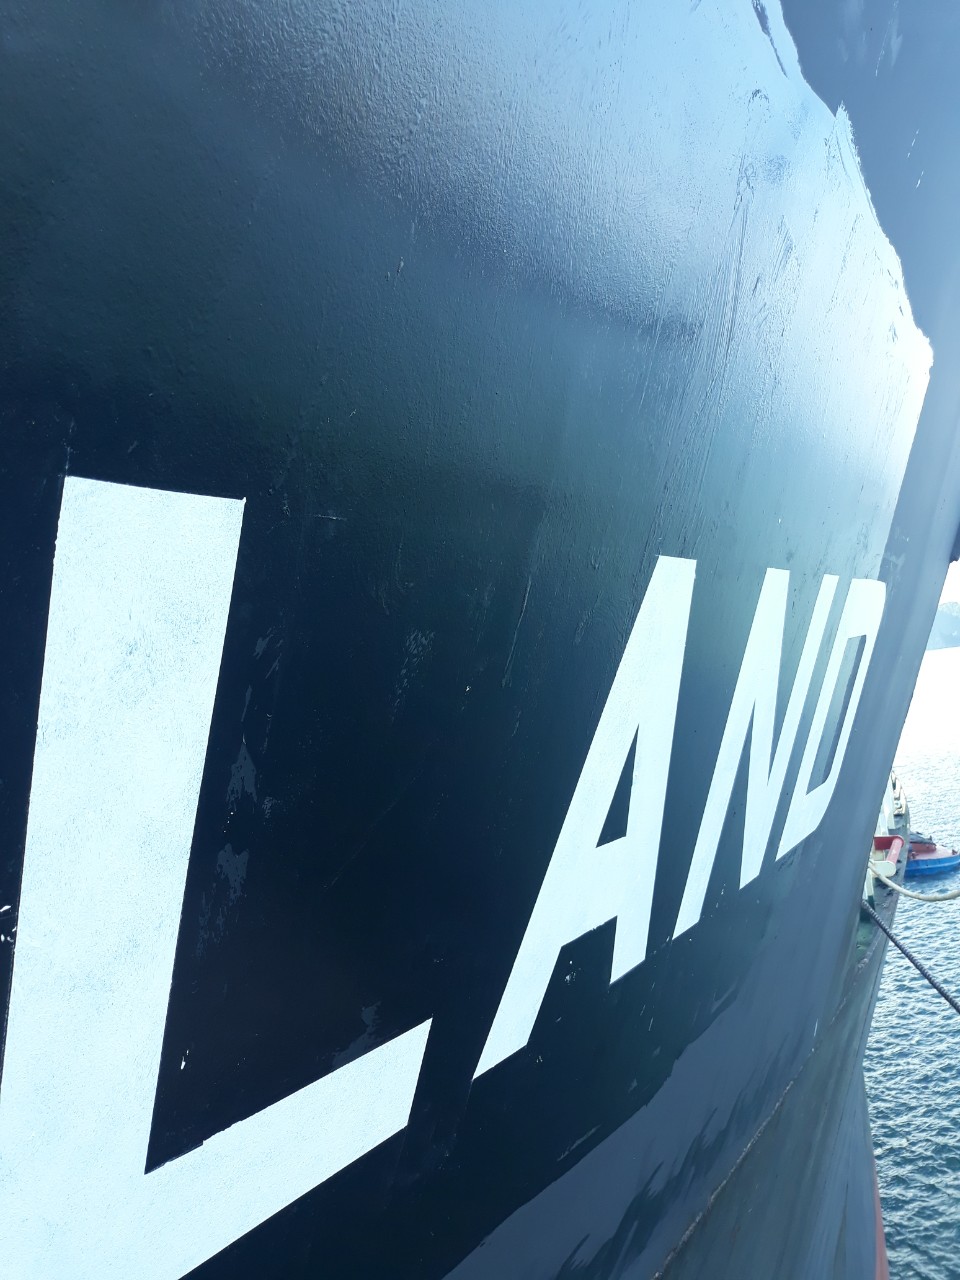 PAINTING SHIP NAME IN VIETNAM